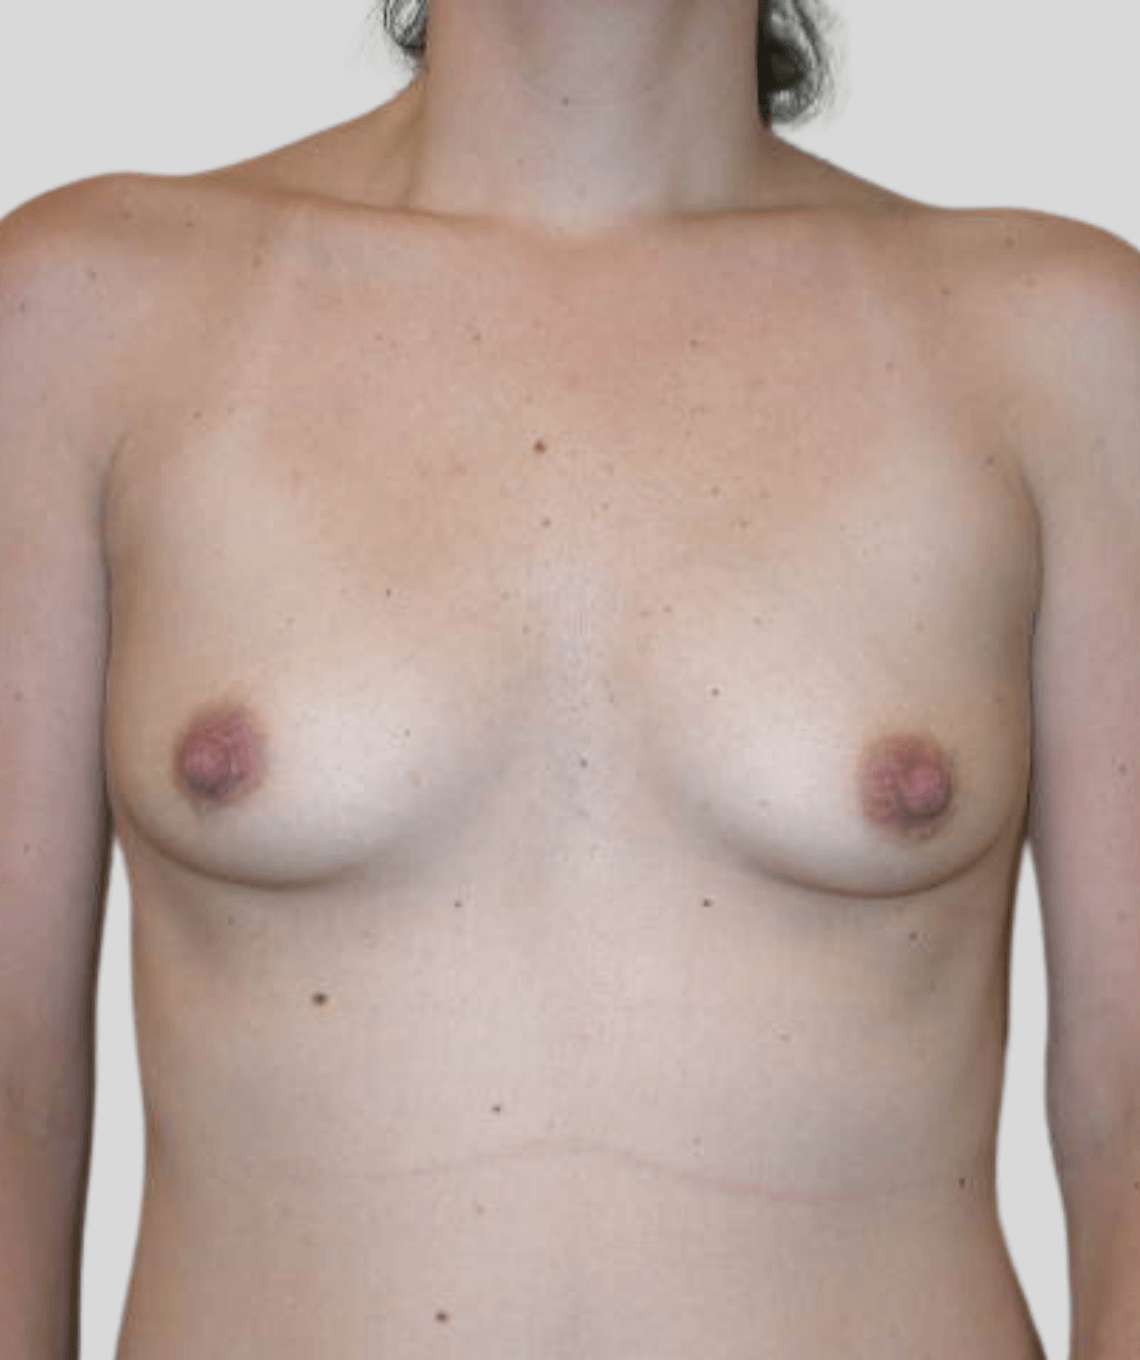 breast augmentation - before and after photos - prma plastic surgery - case 29